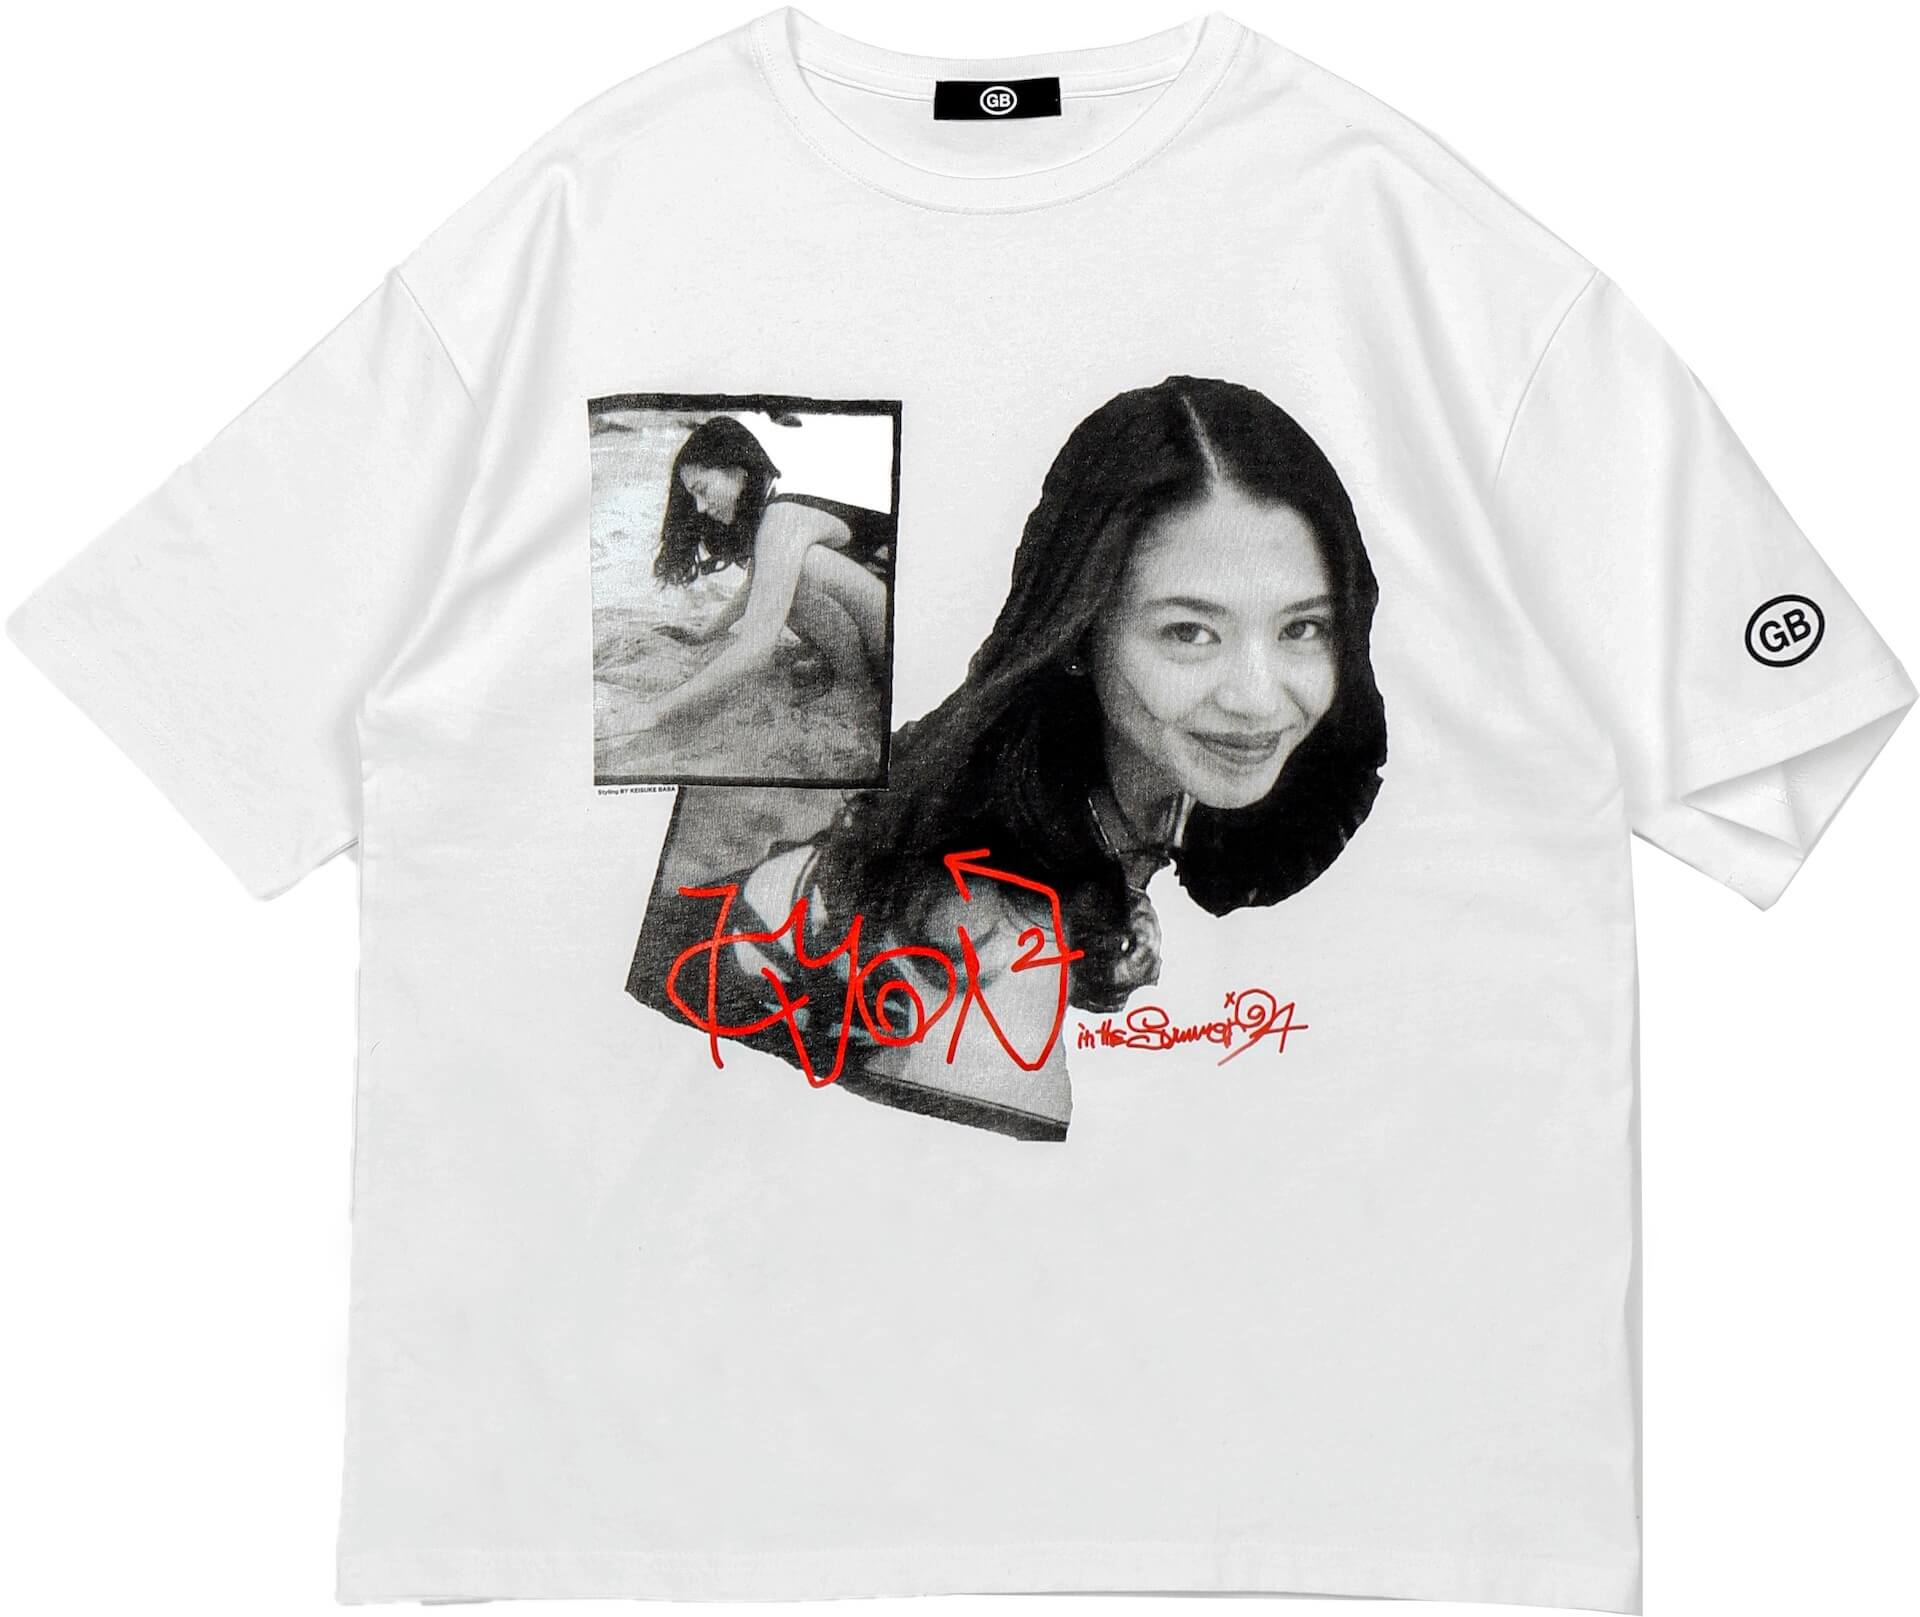 GB by BABA Exclusive Model 小泉今日子 TシャツBlueRibbon